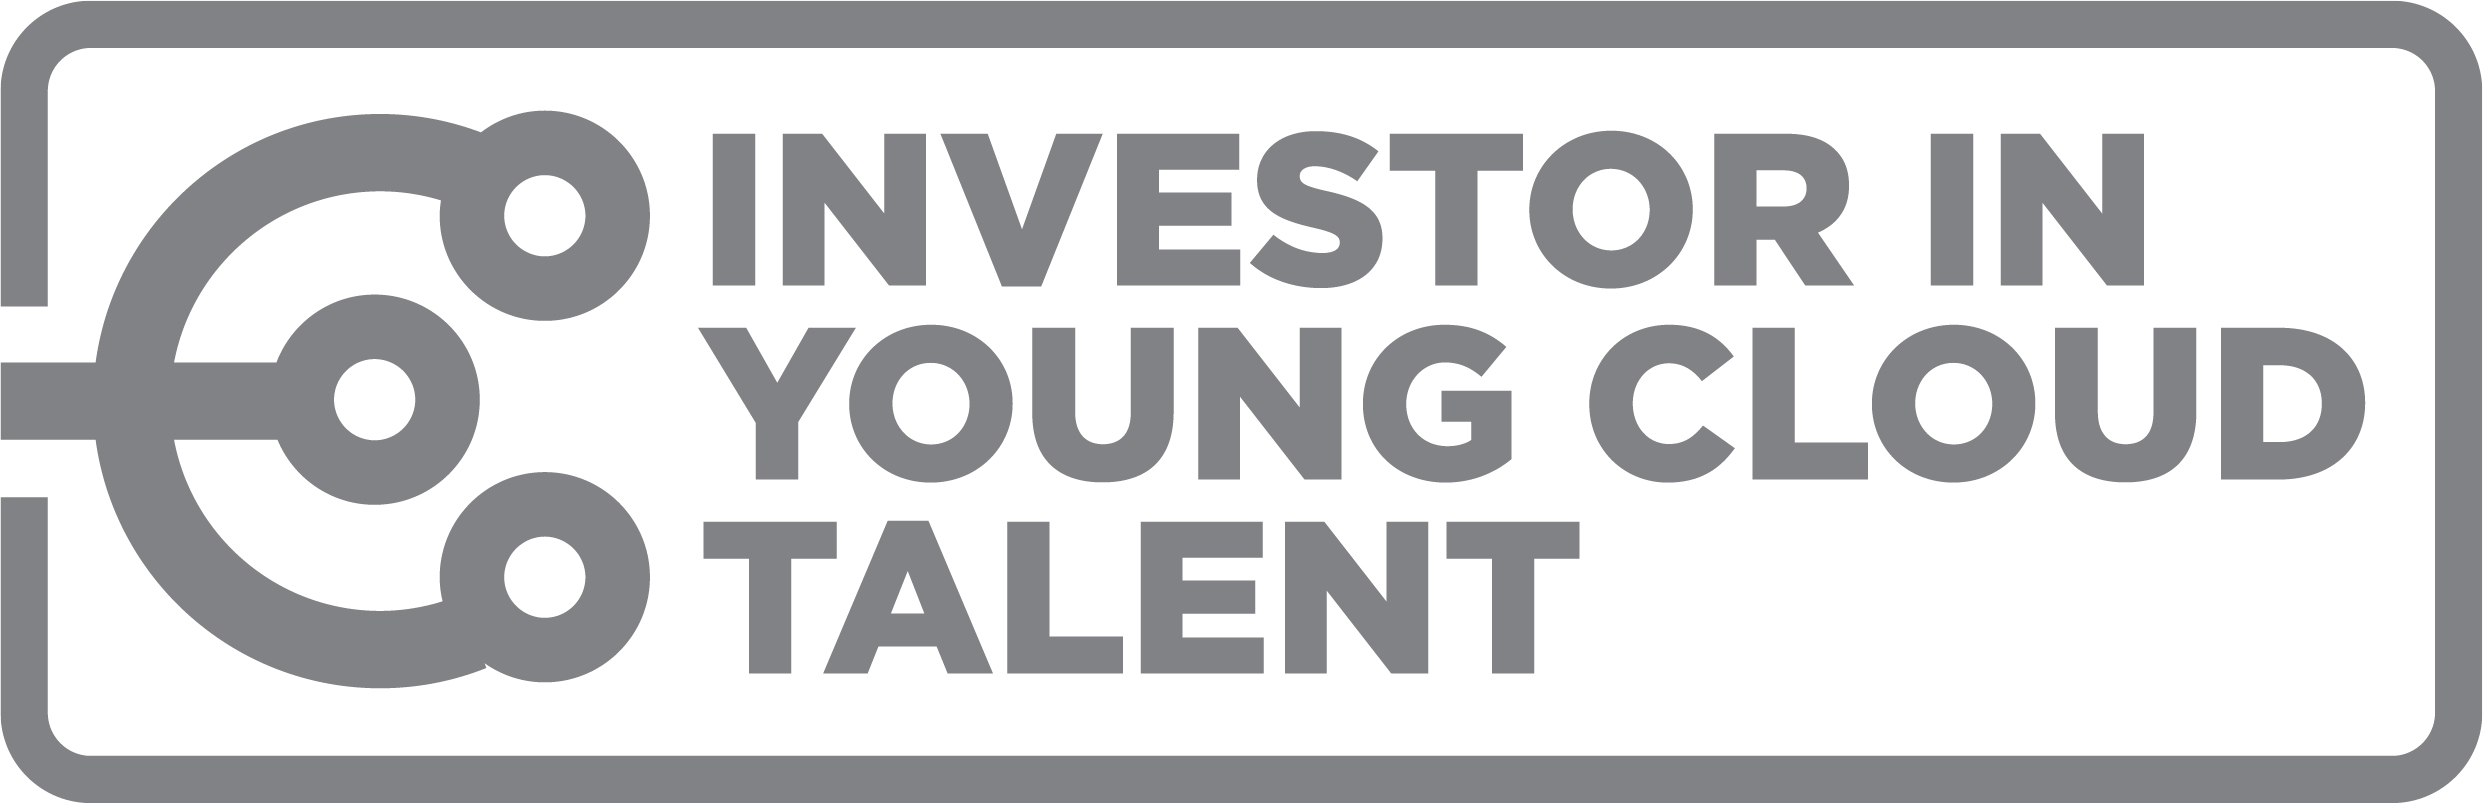 Investor in young cloud talent